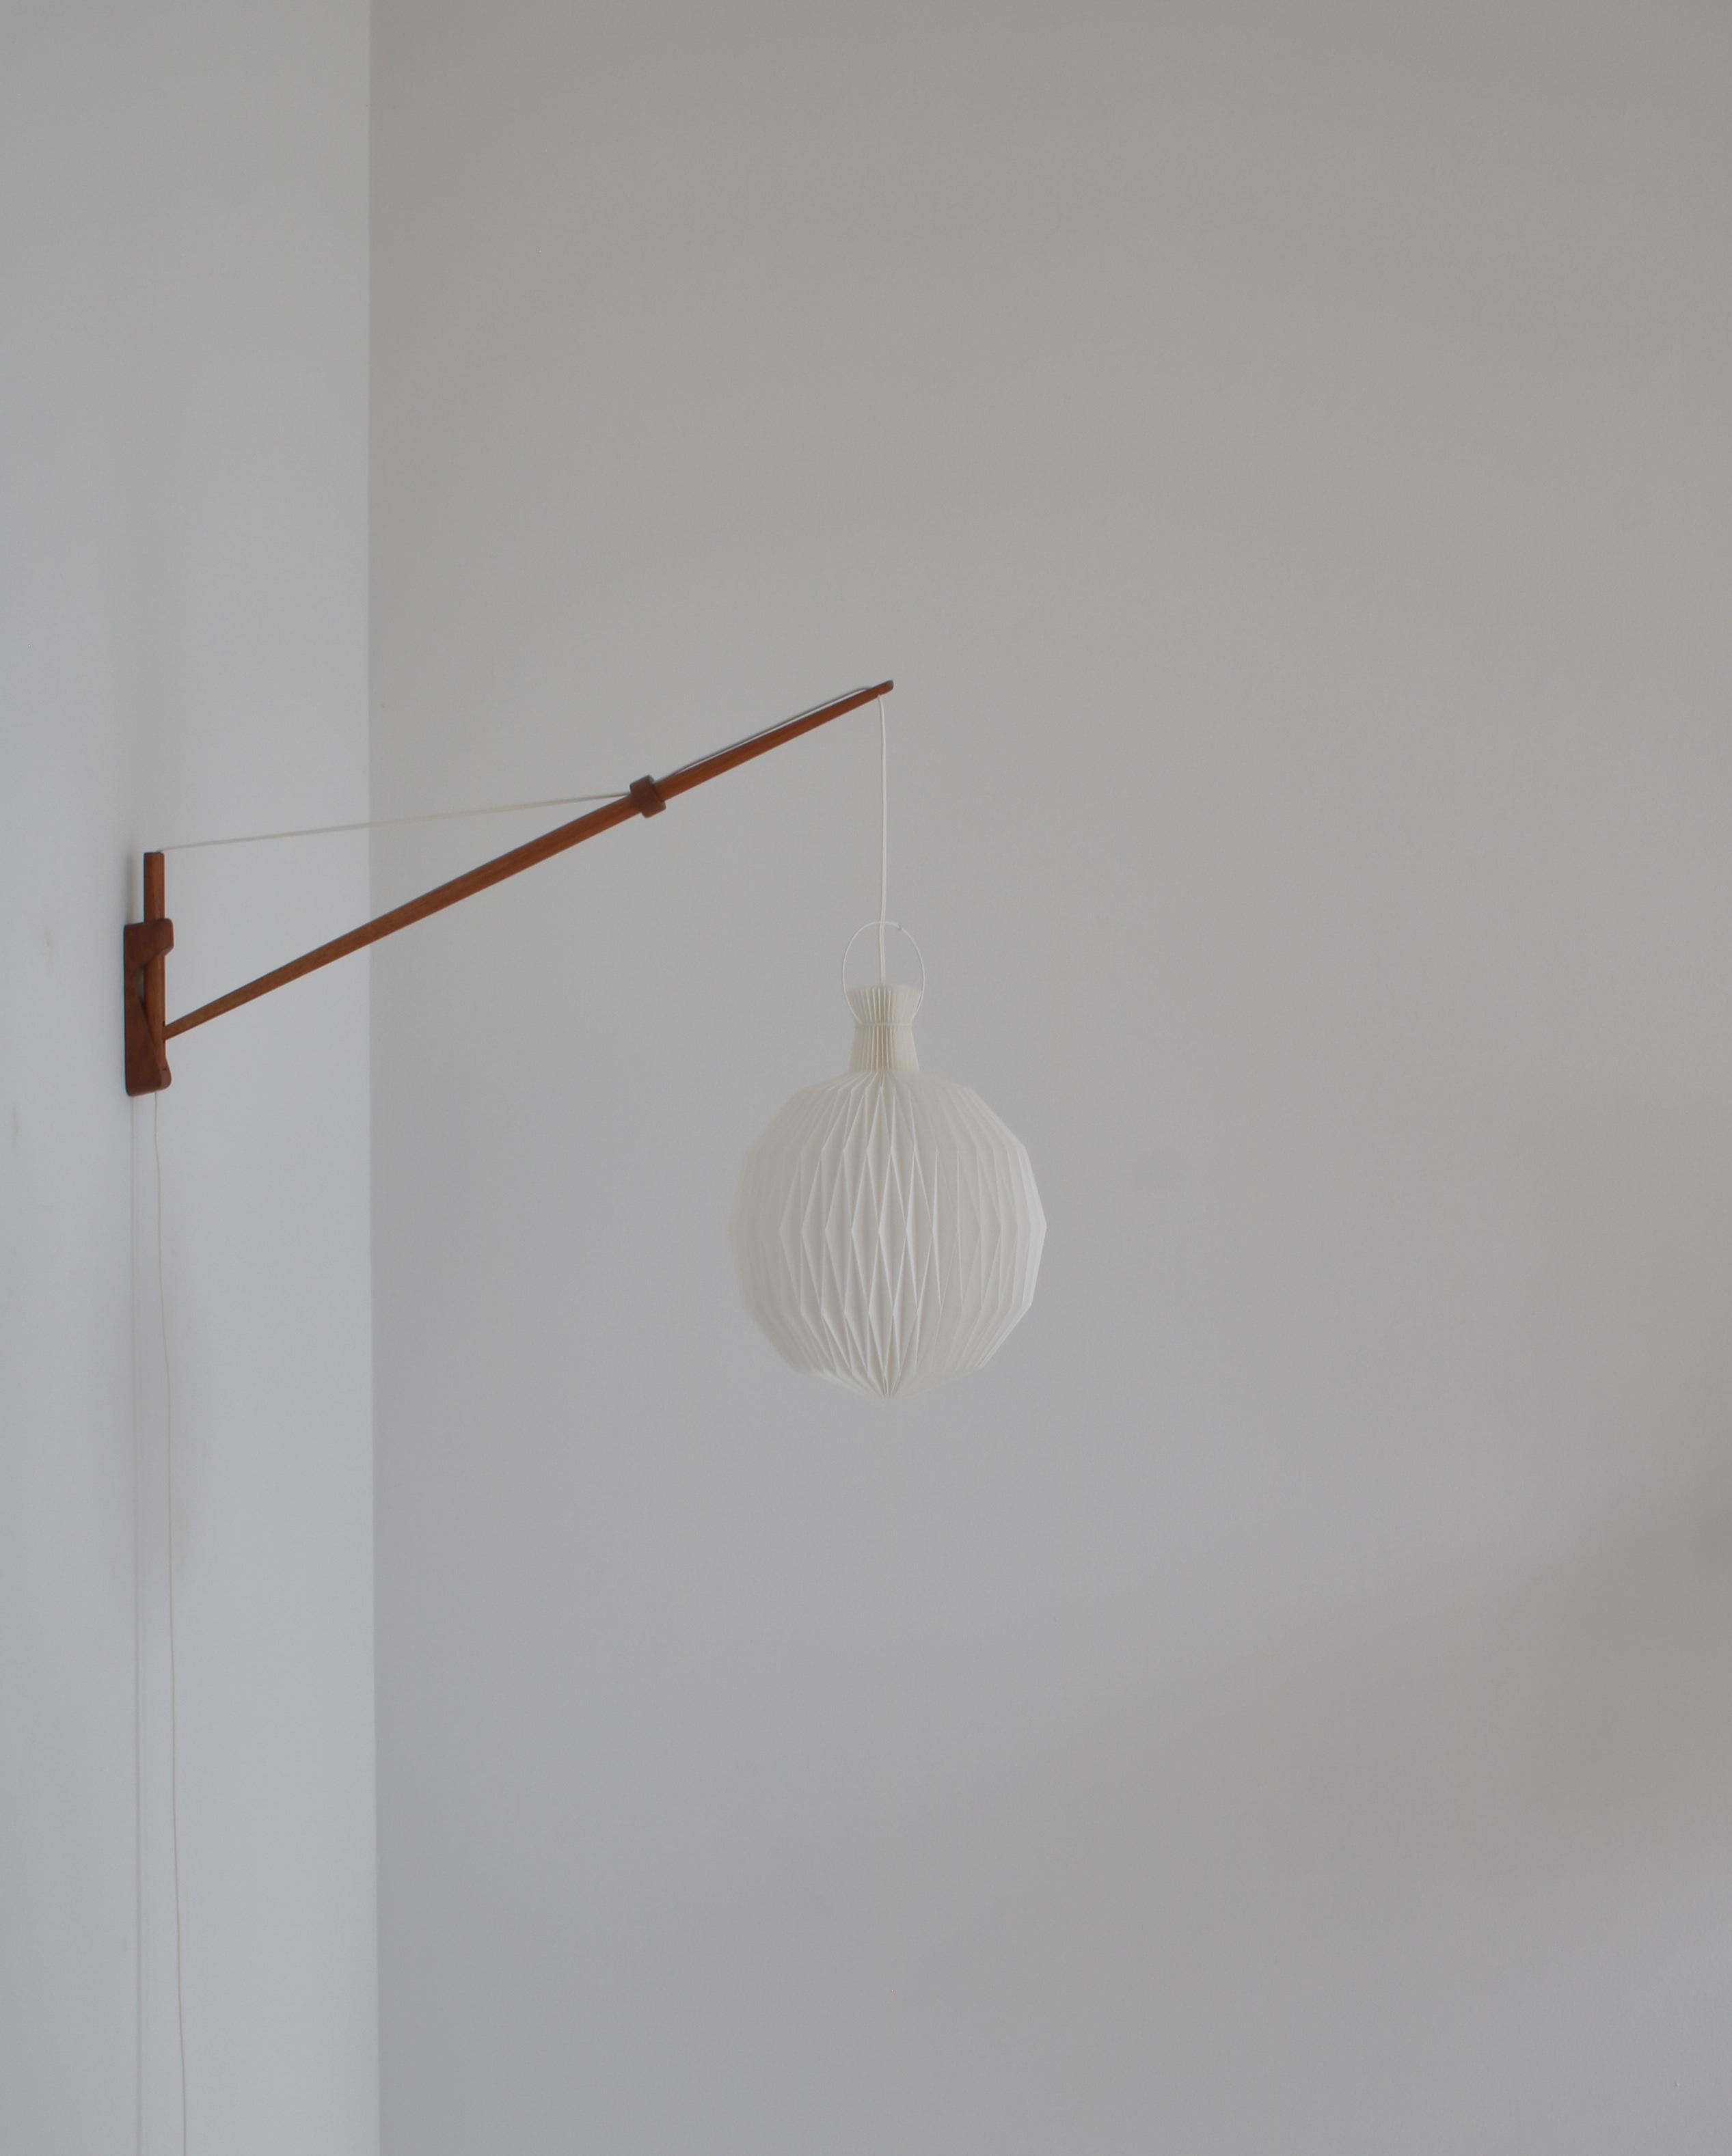 Adjustable wall lamp in patinated oak made in the 1950s by designers A. Bank Jensen & Kjeld Iversen for Louis Poulsen, Copenhagen. The lamp can be adjusted in any directions and angles simply by pulling or releasing the wire. The lamp features a new